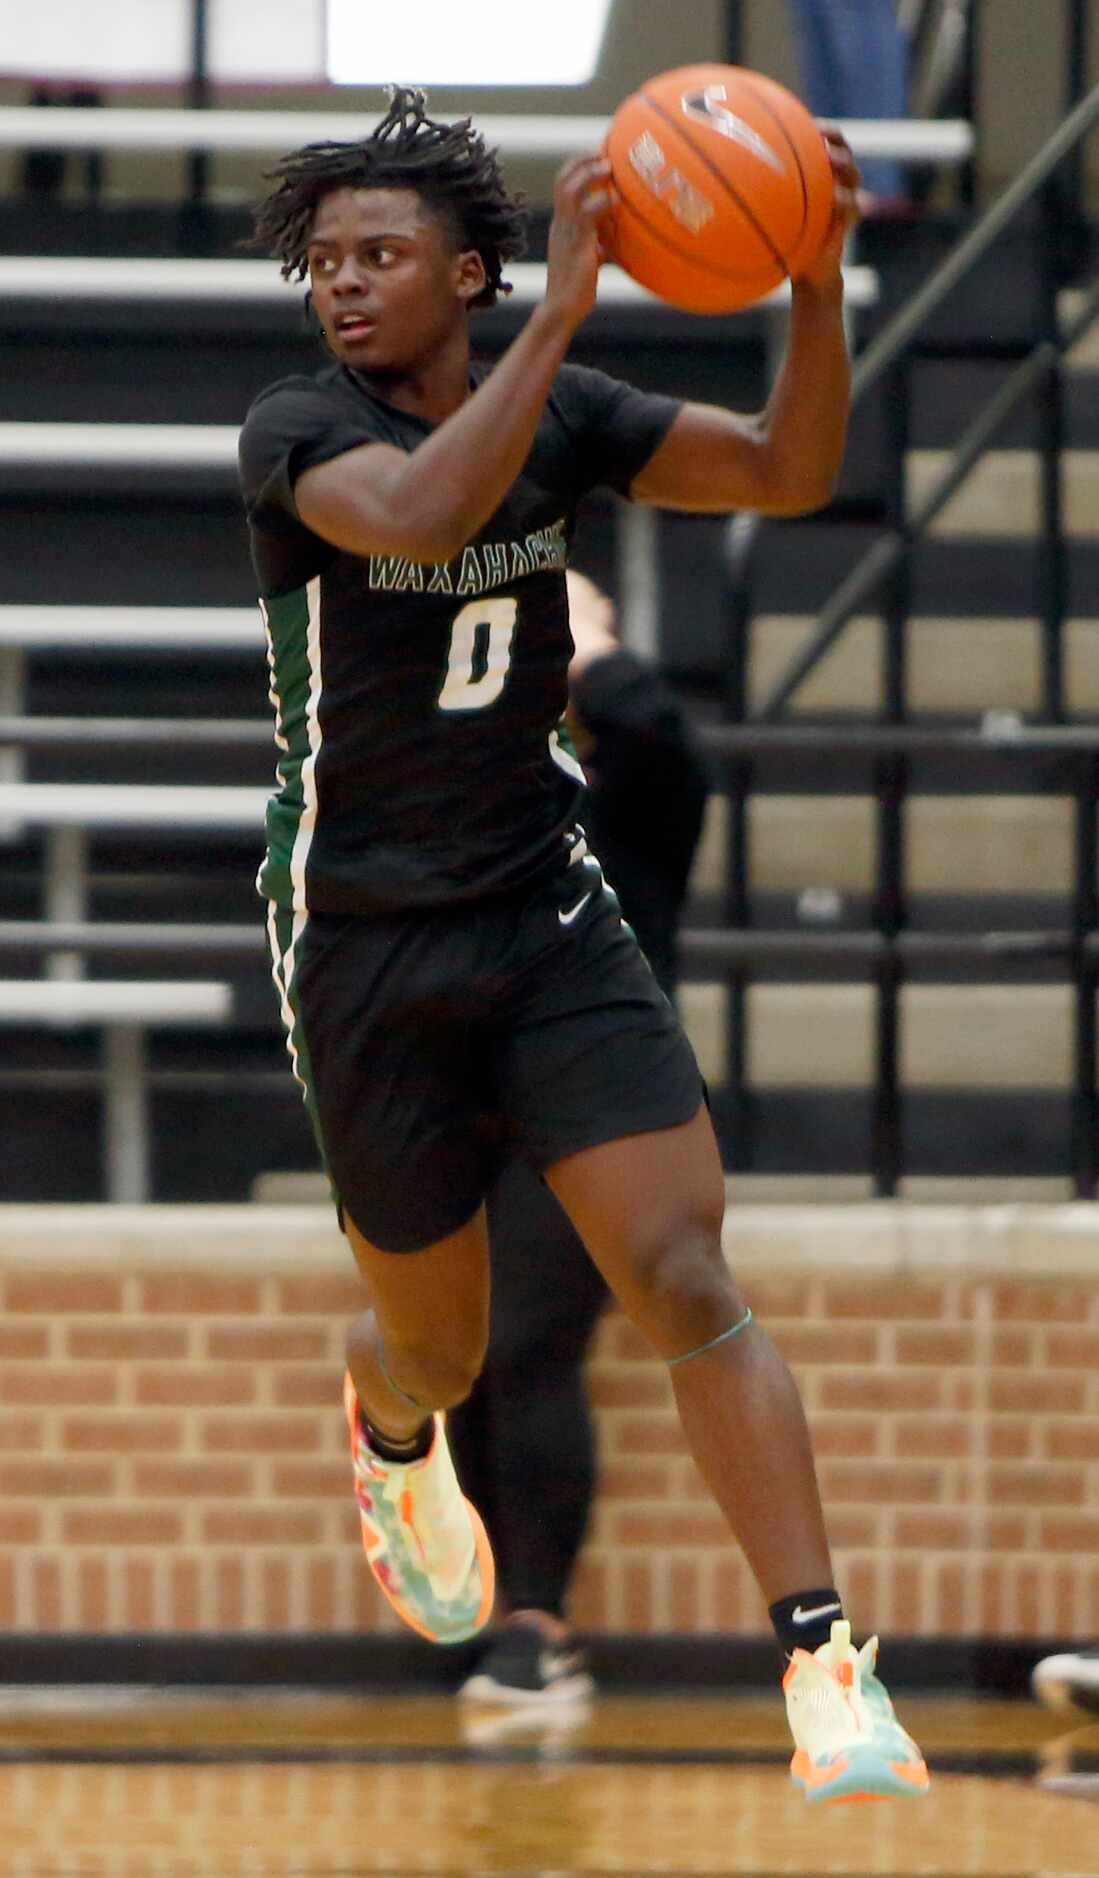 Waxahachie guard BJ Francis (0) leaps to pull down a long pass as he looks over the Coppell...